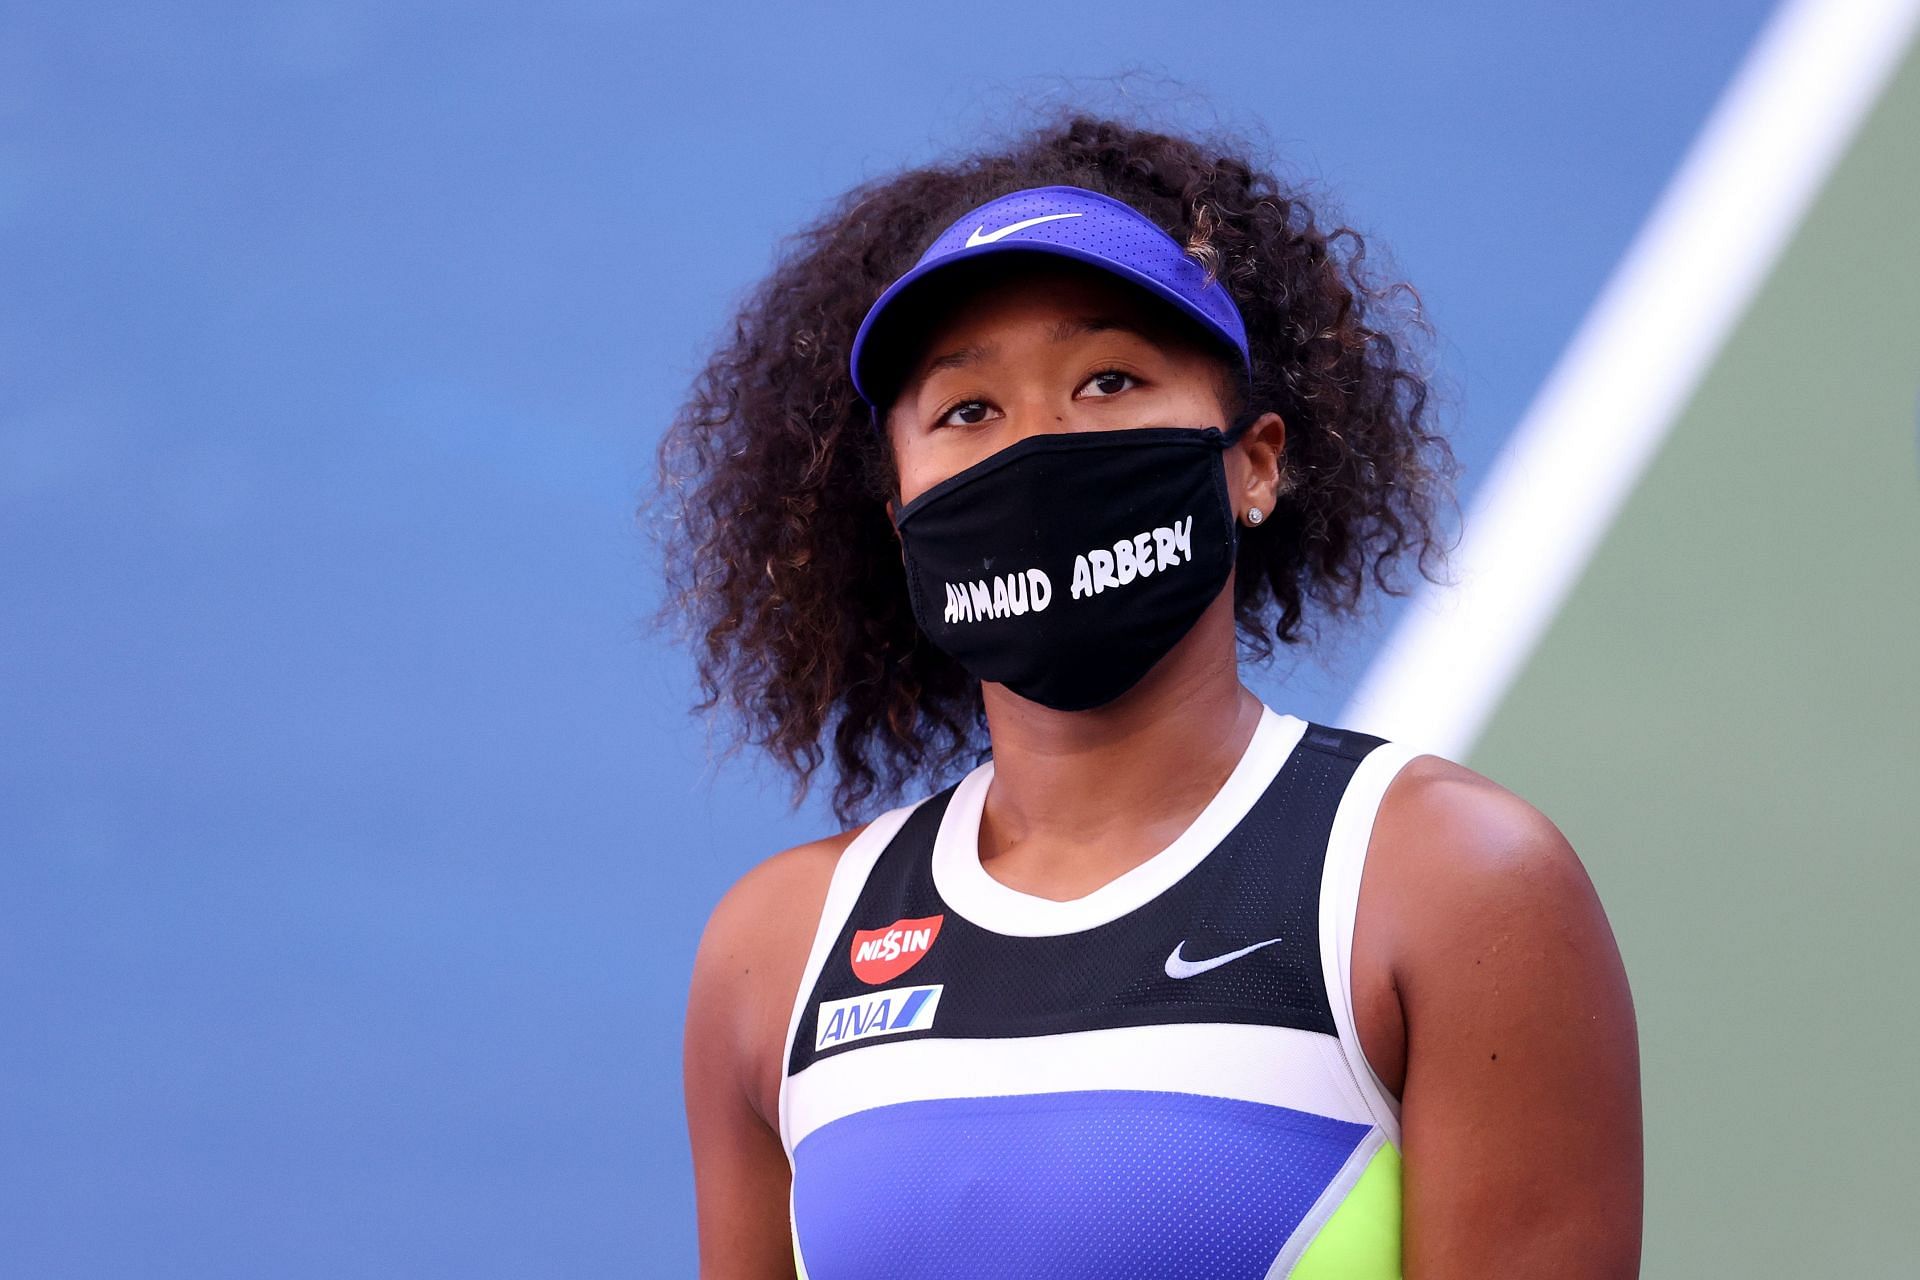 Naomi Osaka has intertwined her activism along with her tennis.